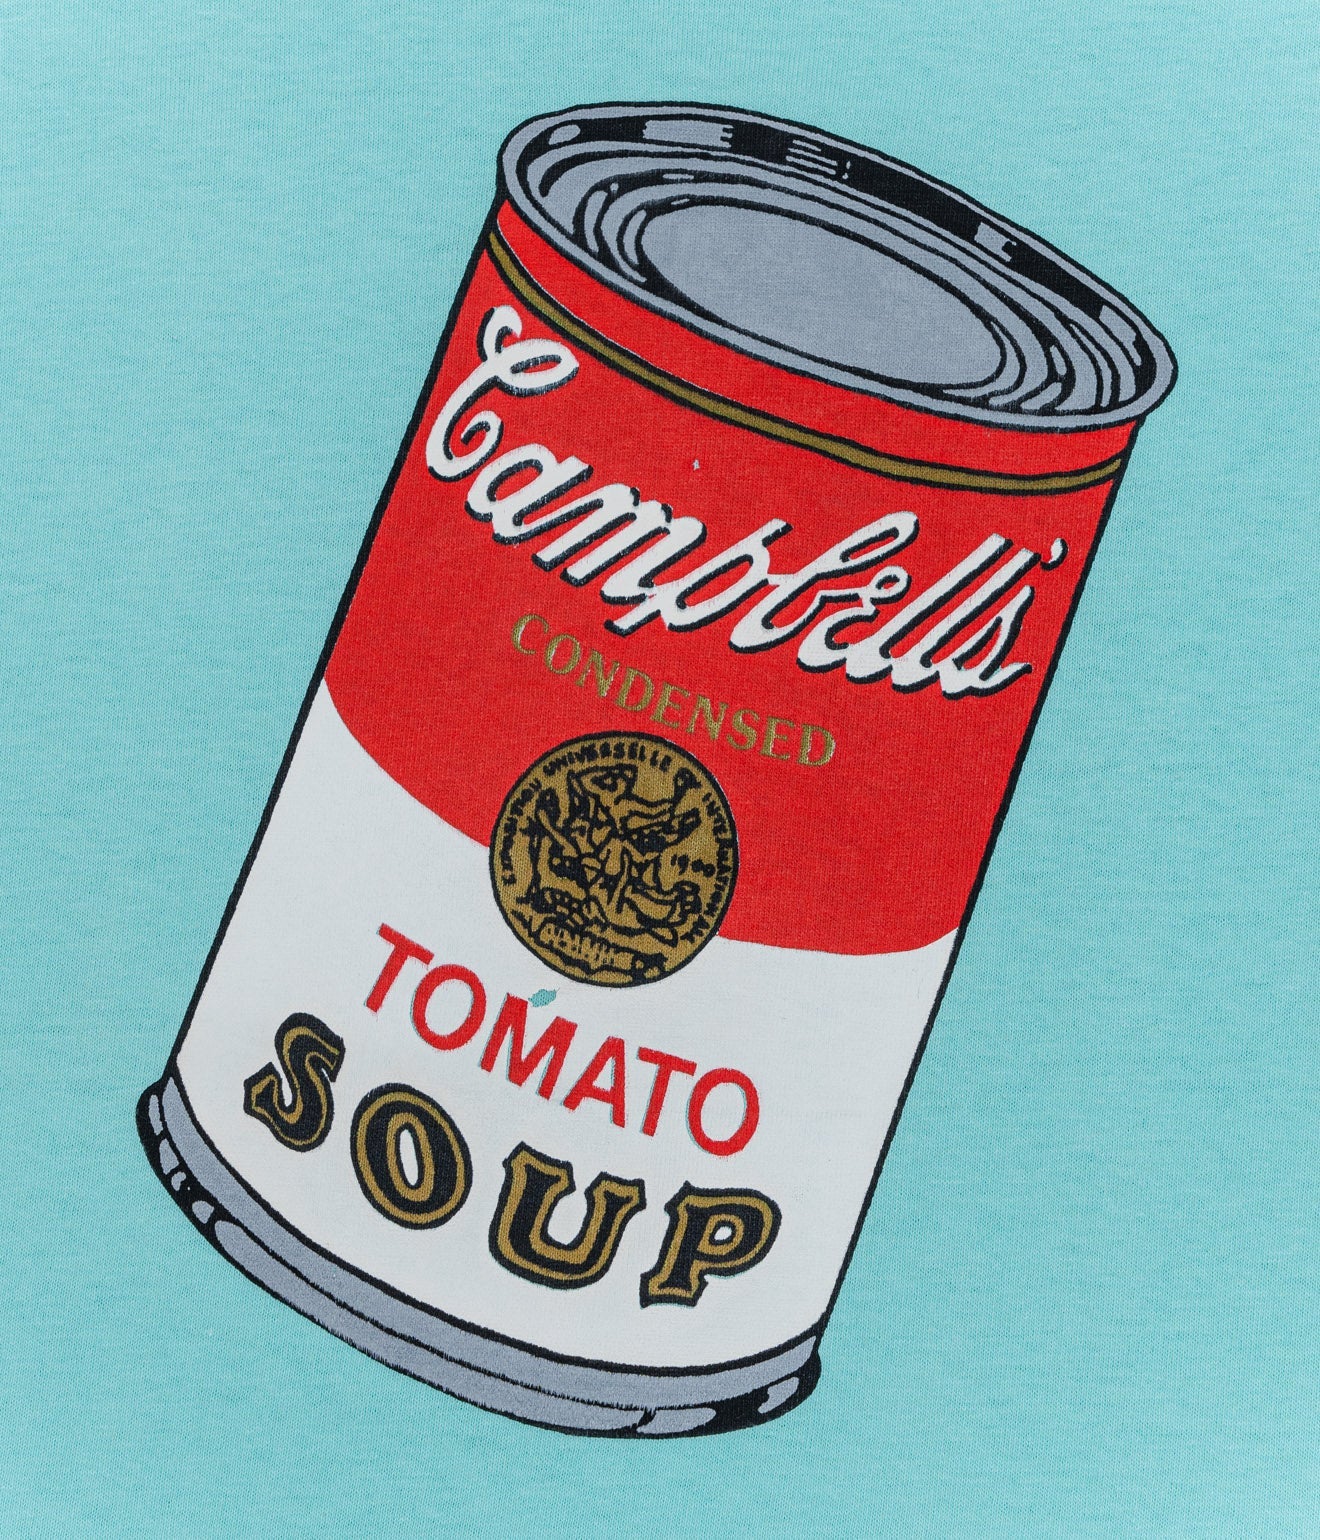 90's "Campbell's Soup Can" T-SHIRT MINT - WEAREALLANIMALS